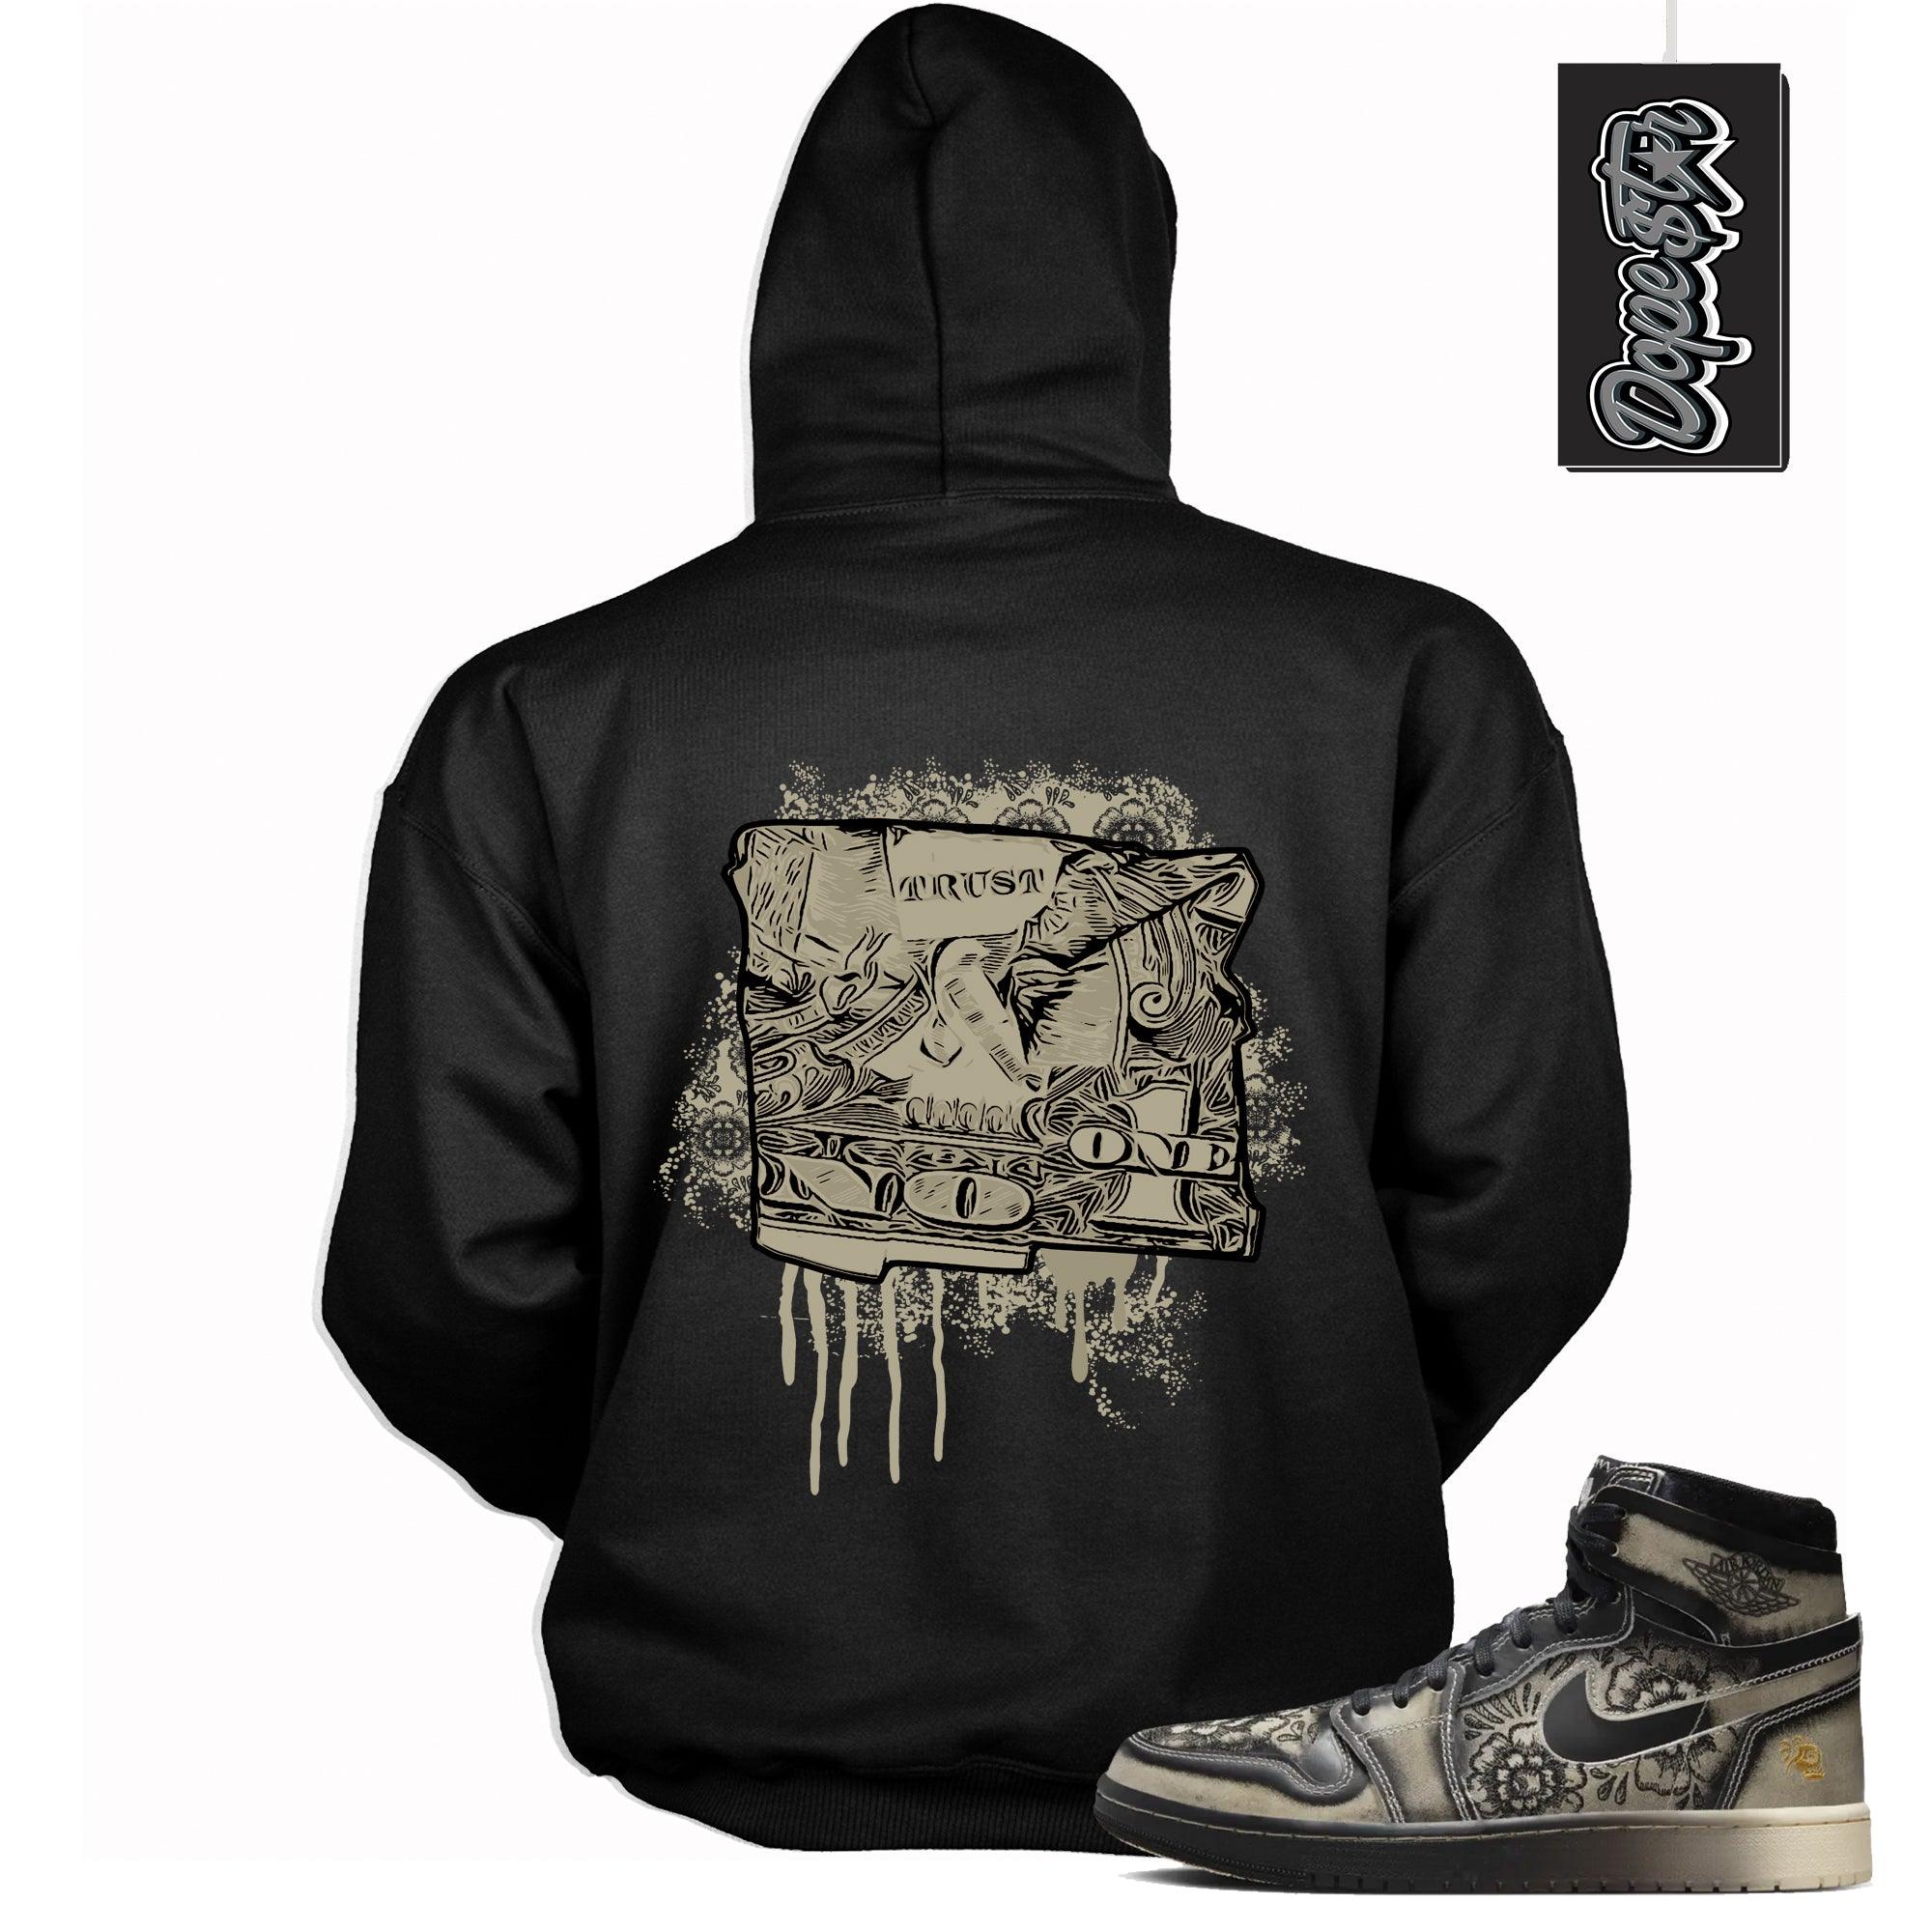 Cool Black Graphic Hoodie with “ Trust No One Dollar “ print, that perfectly matches Air Jordan 1 High Zoom Comfort 2 Dia de Muertos Black and Pale Ivory sneakers